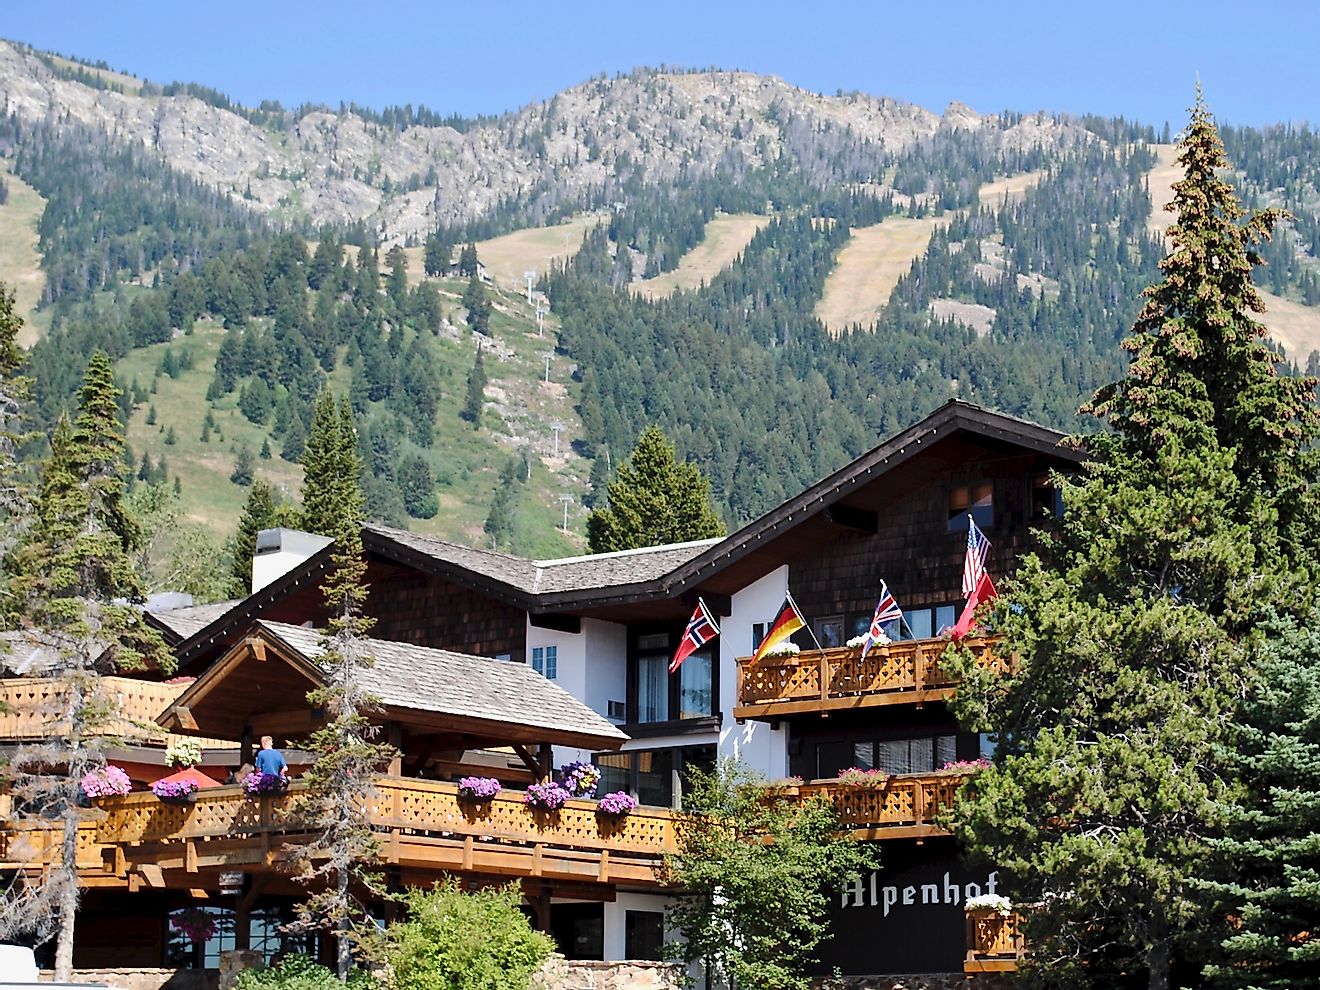 The Alpenhof hotel is a European Alpine style ski lodge located at the base of the Jackson Hole Mountain Resort, next to the Aerial Tram, in the heart of Teton Village.